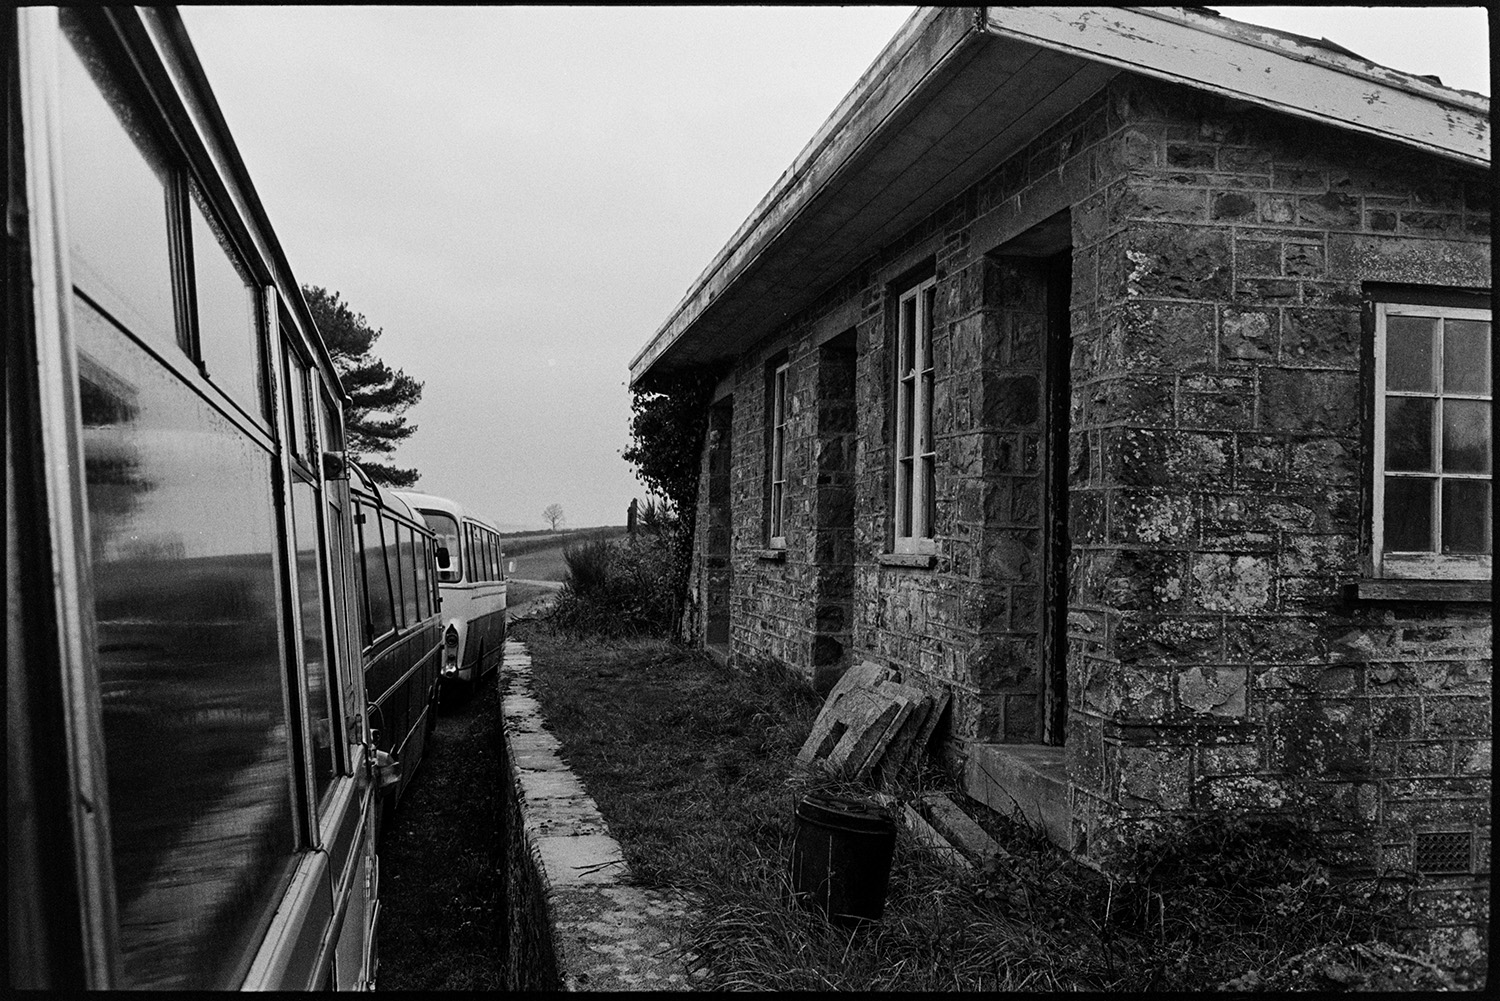 Disused railway station with parked buses. 
[The disused building of Meeth Railway Station with three buses parked outside. The platform is overgrown with grass and brambles.]